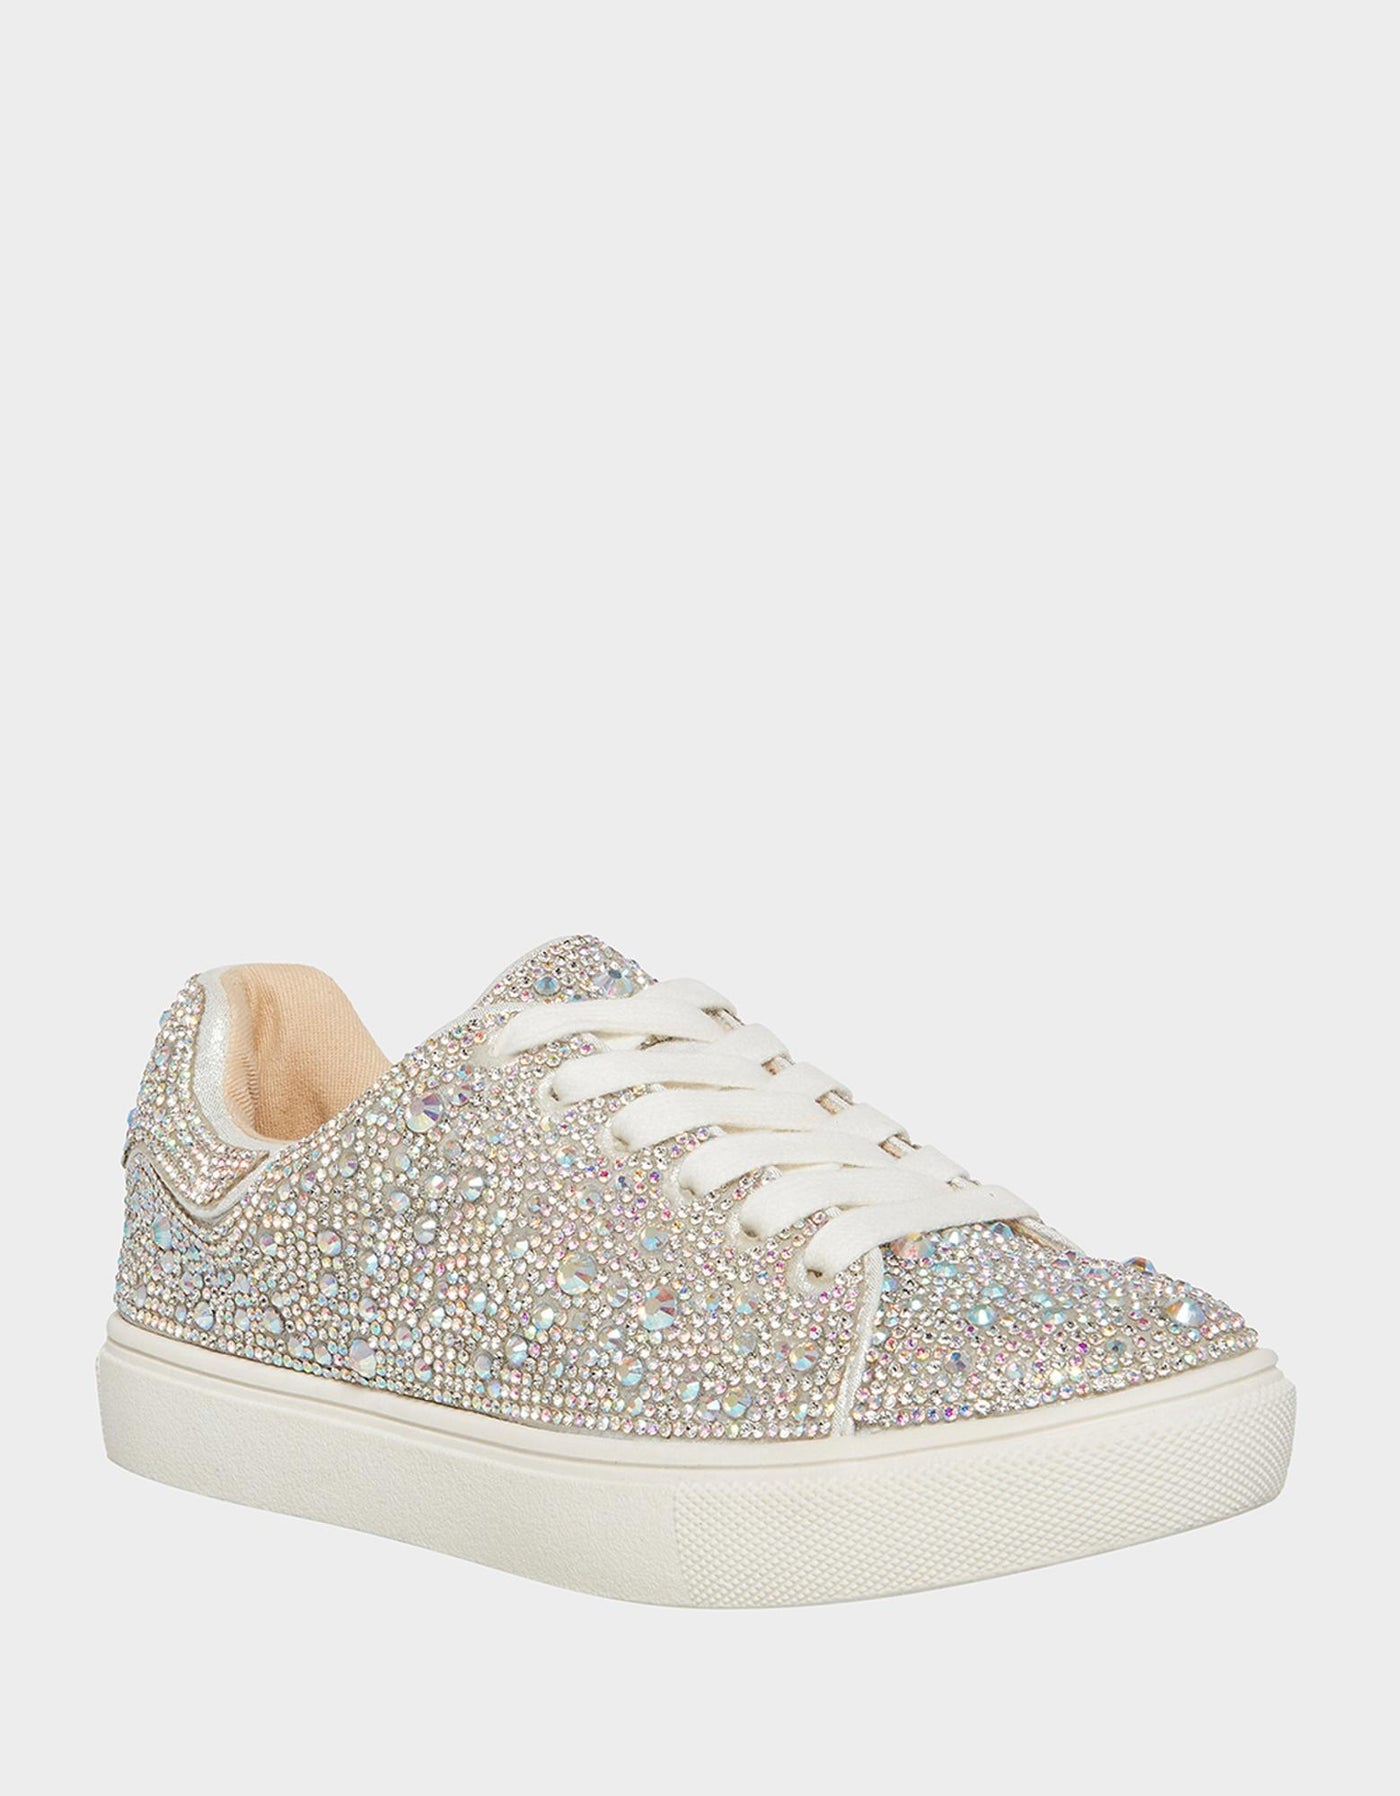 Betsey Johnson Sidny Rhinestone Sneakers - YOUTH | The Perfect Pair-K Footwear-Graceful & Chic Boutique, Family Clothing Store in Waxahachie, Texas